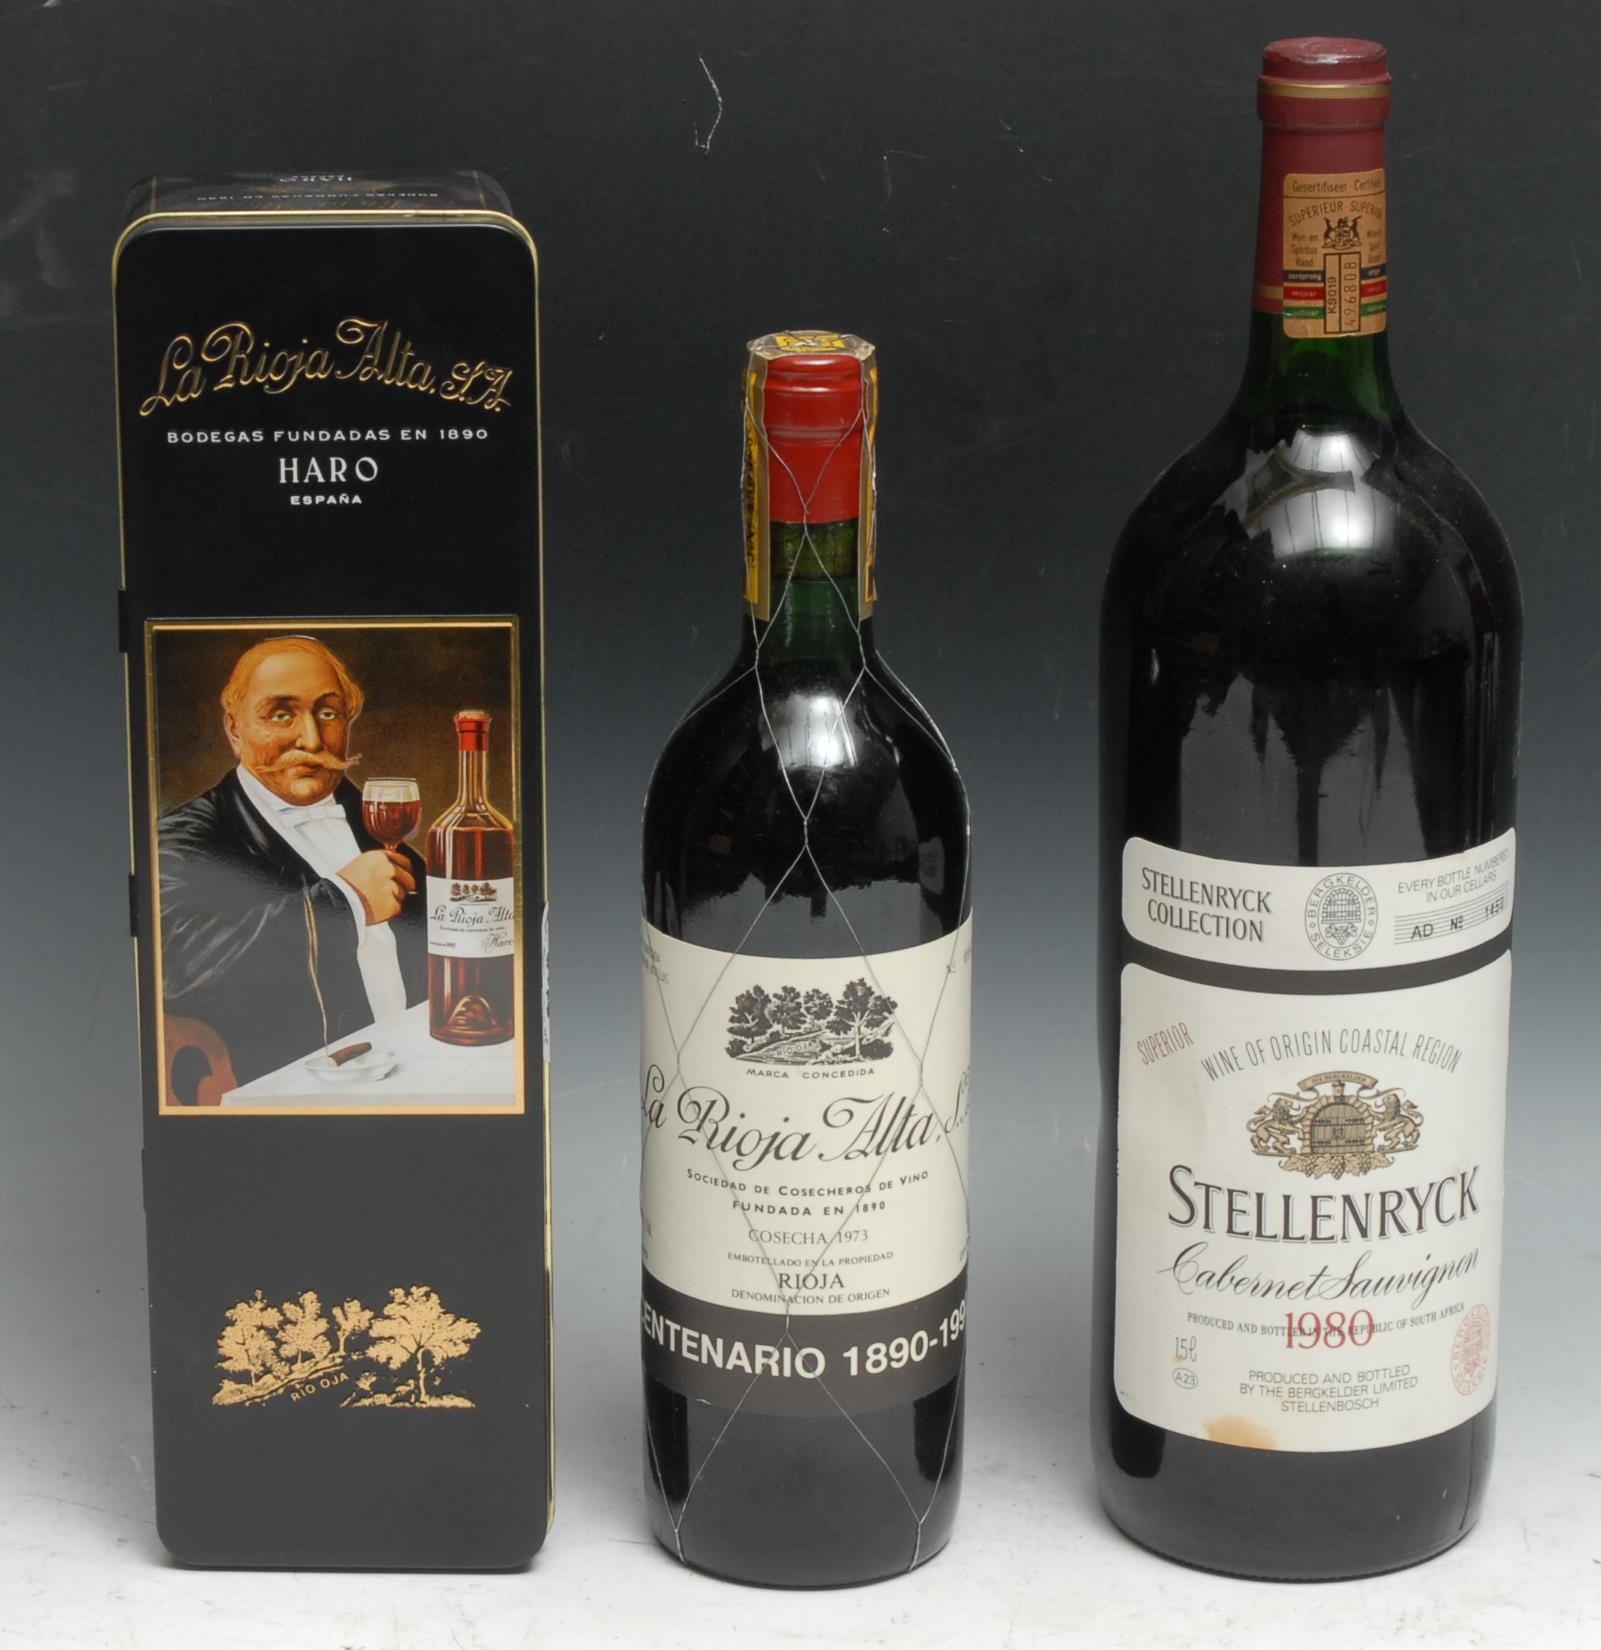 La Rioja Alta, S.A. Cosecha 1973, bottled for the 1890-1990 centenary, 75cl, 12.5%, labels good,